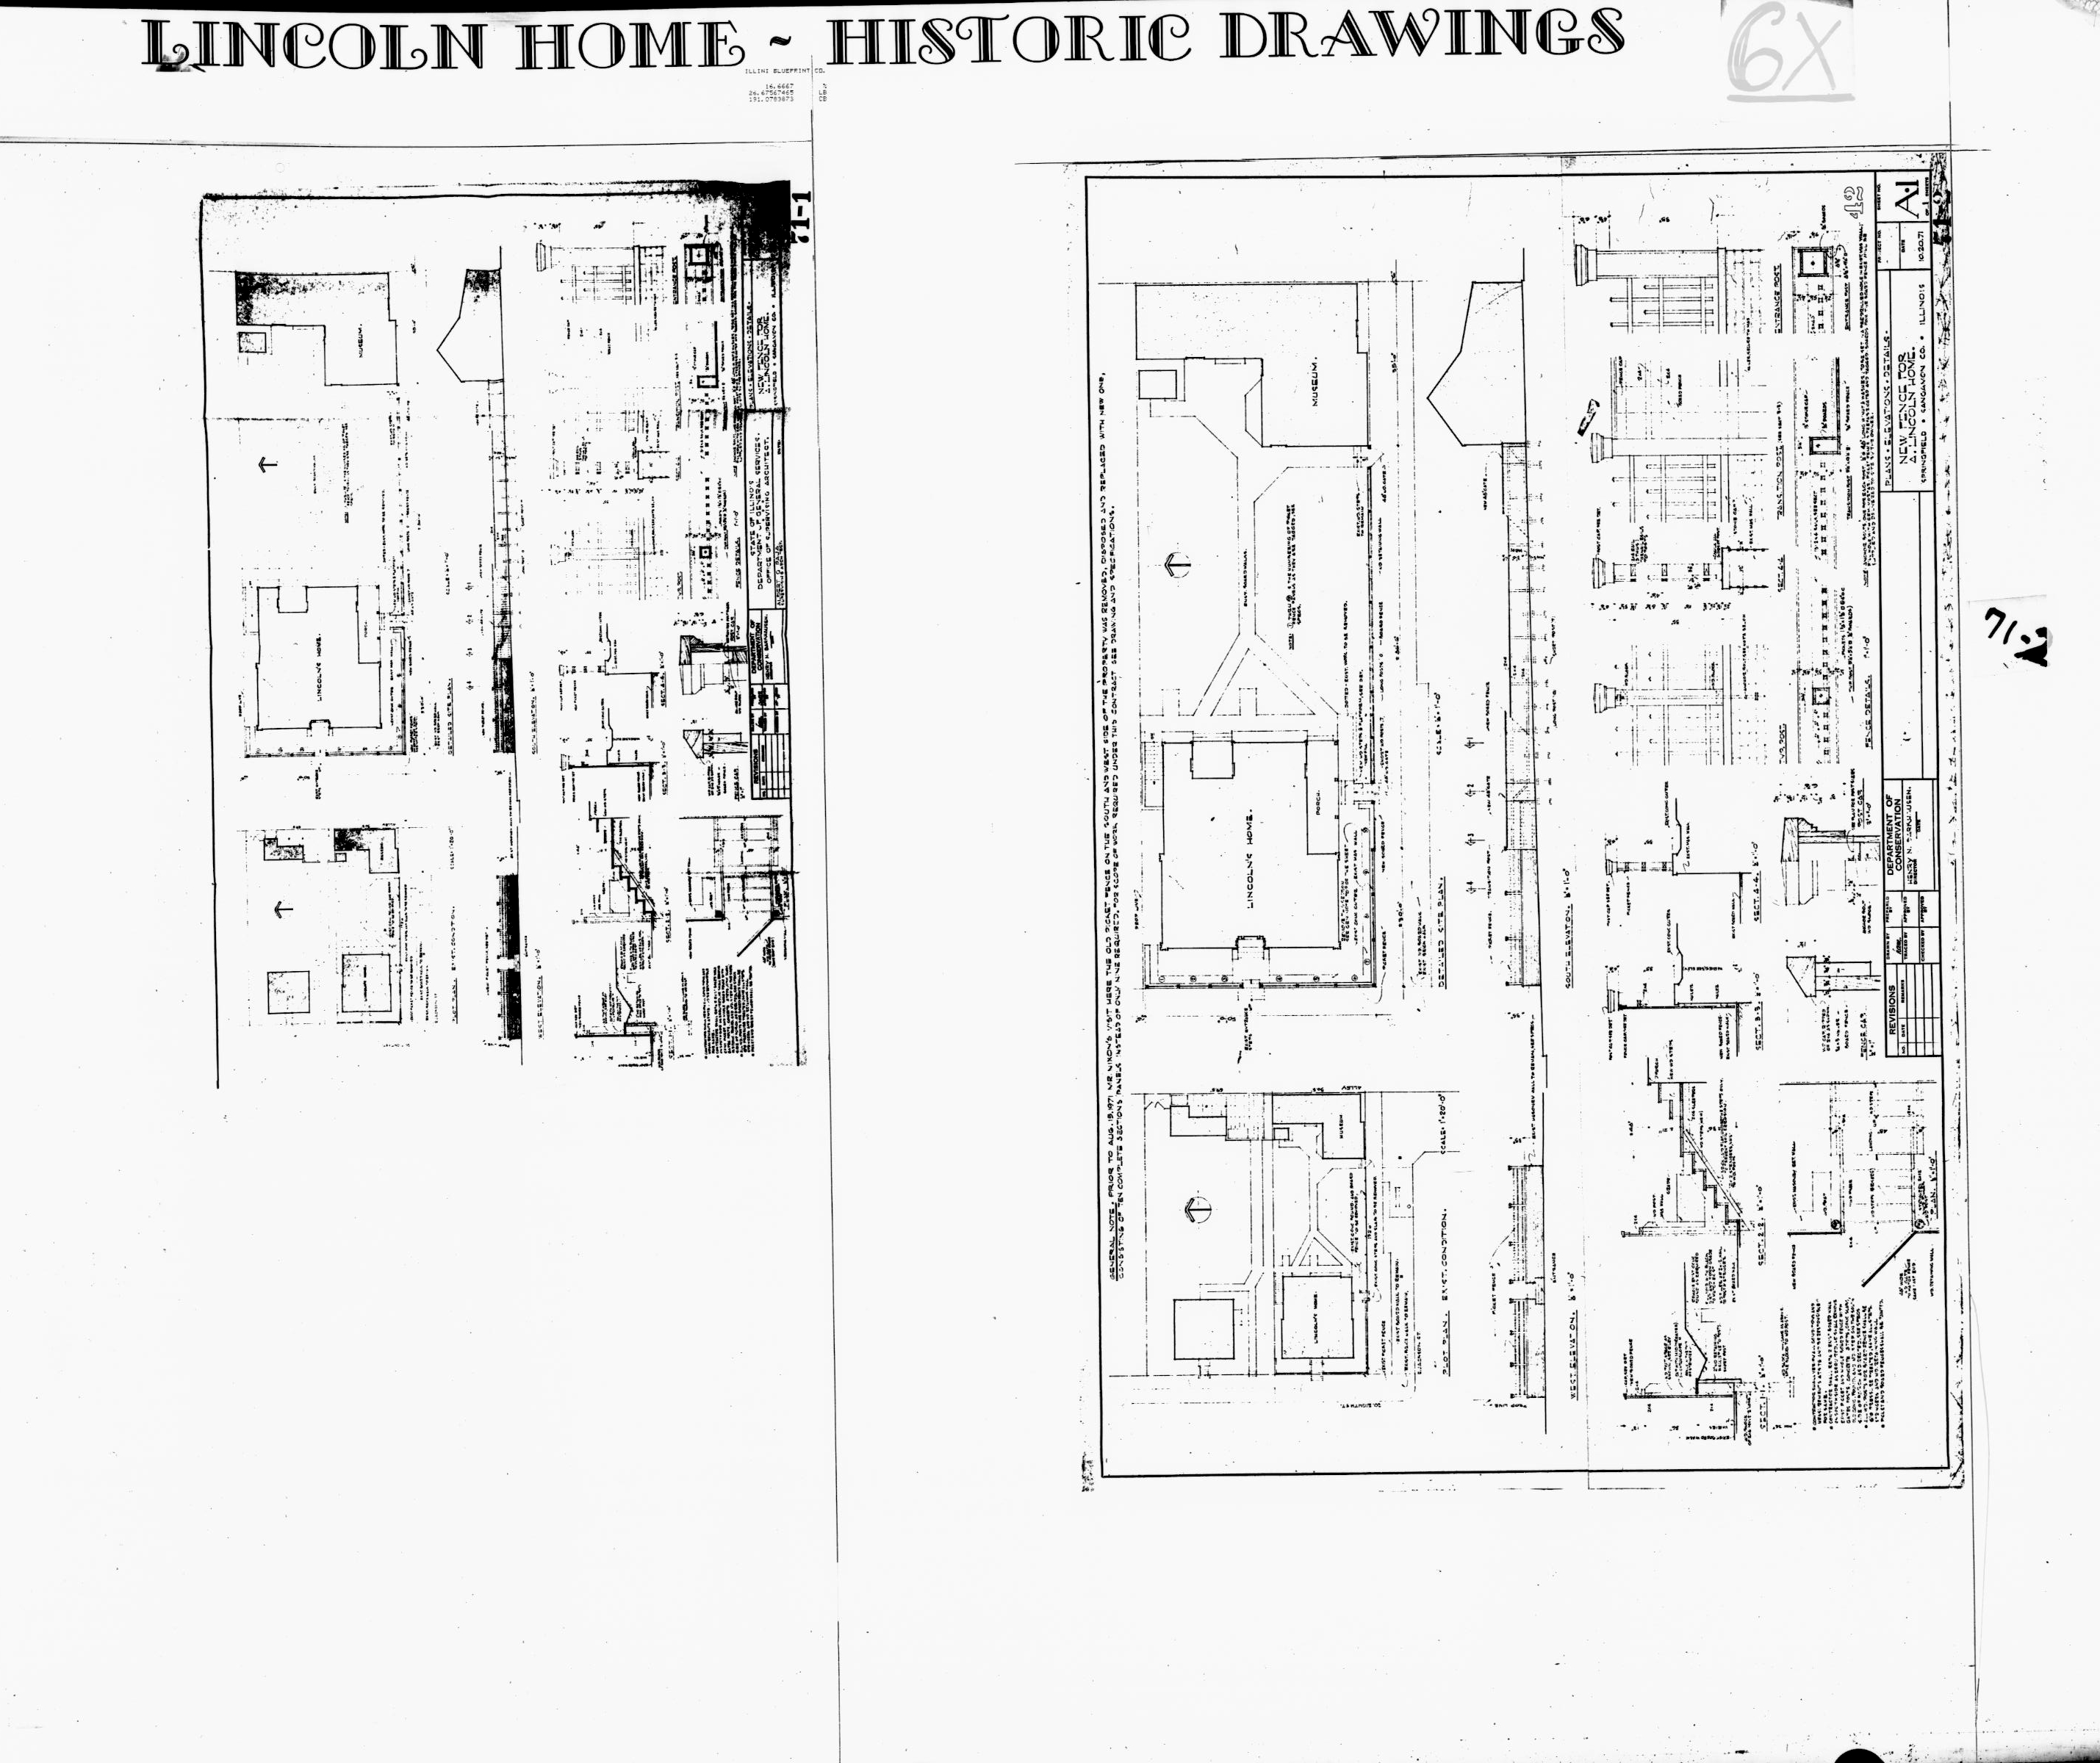 Lincoln Home - Historic Drawings  52 Lincoln, home, historic drawings, new fence, plan, elevation & details